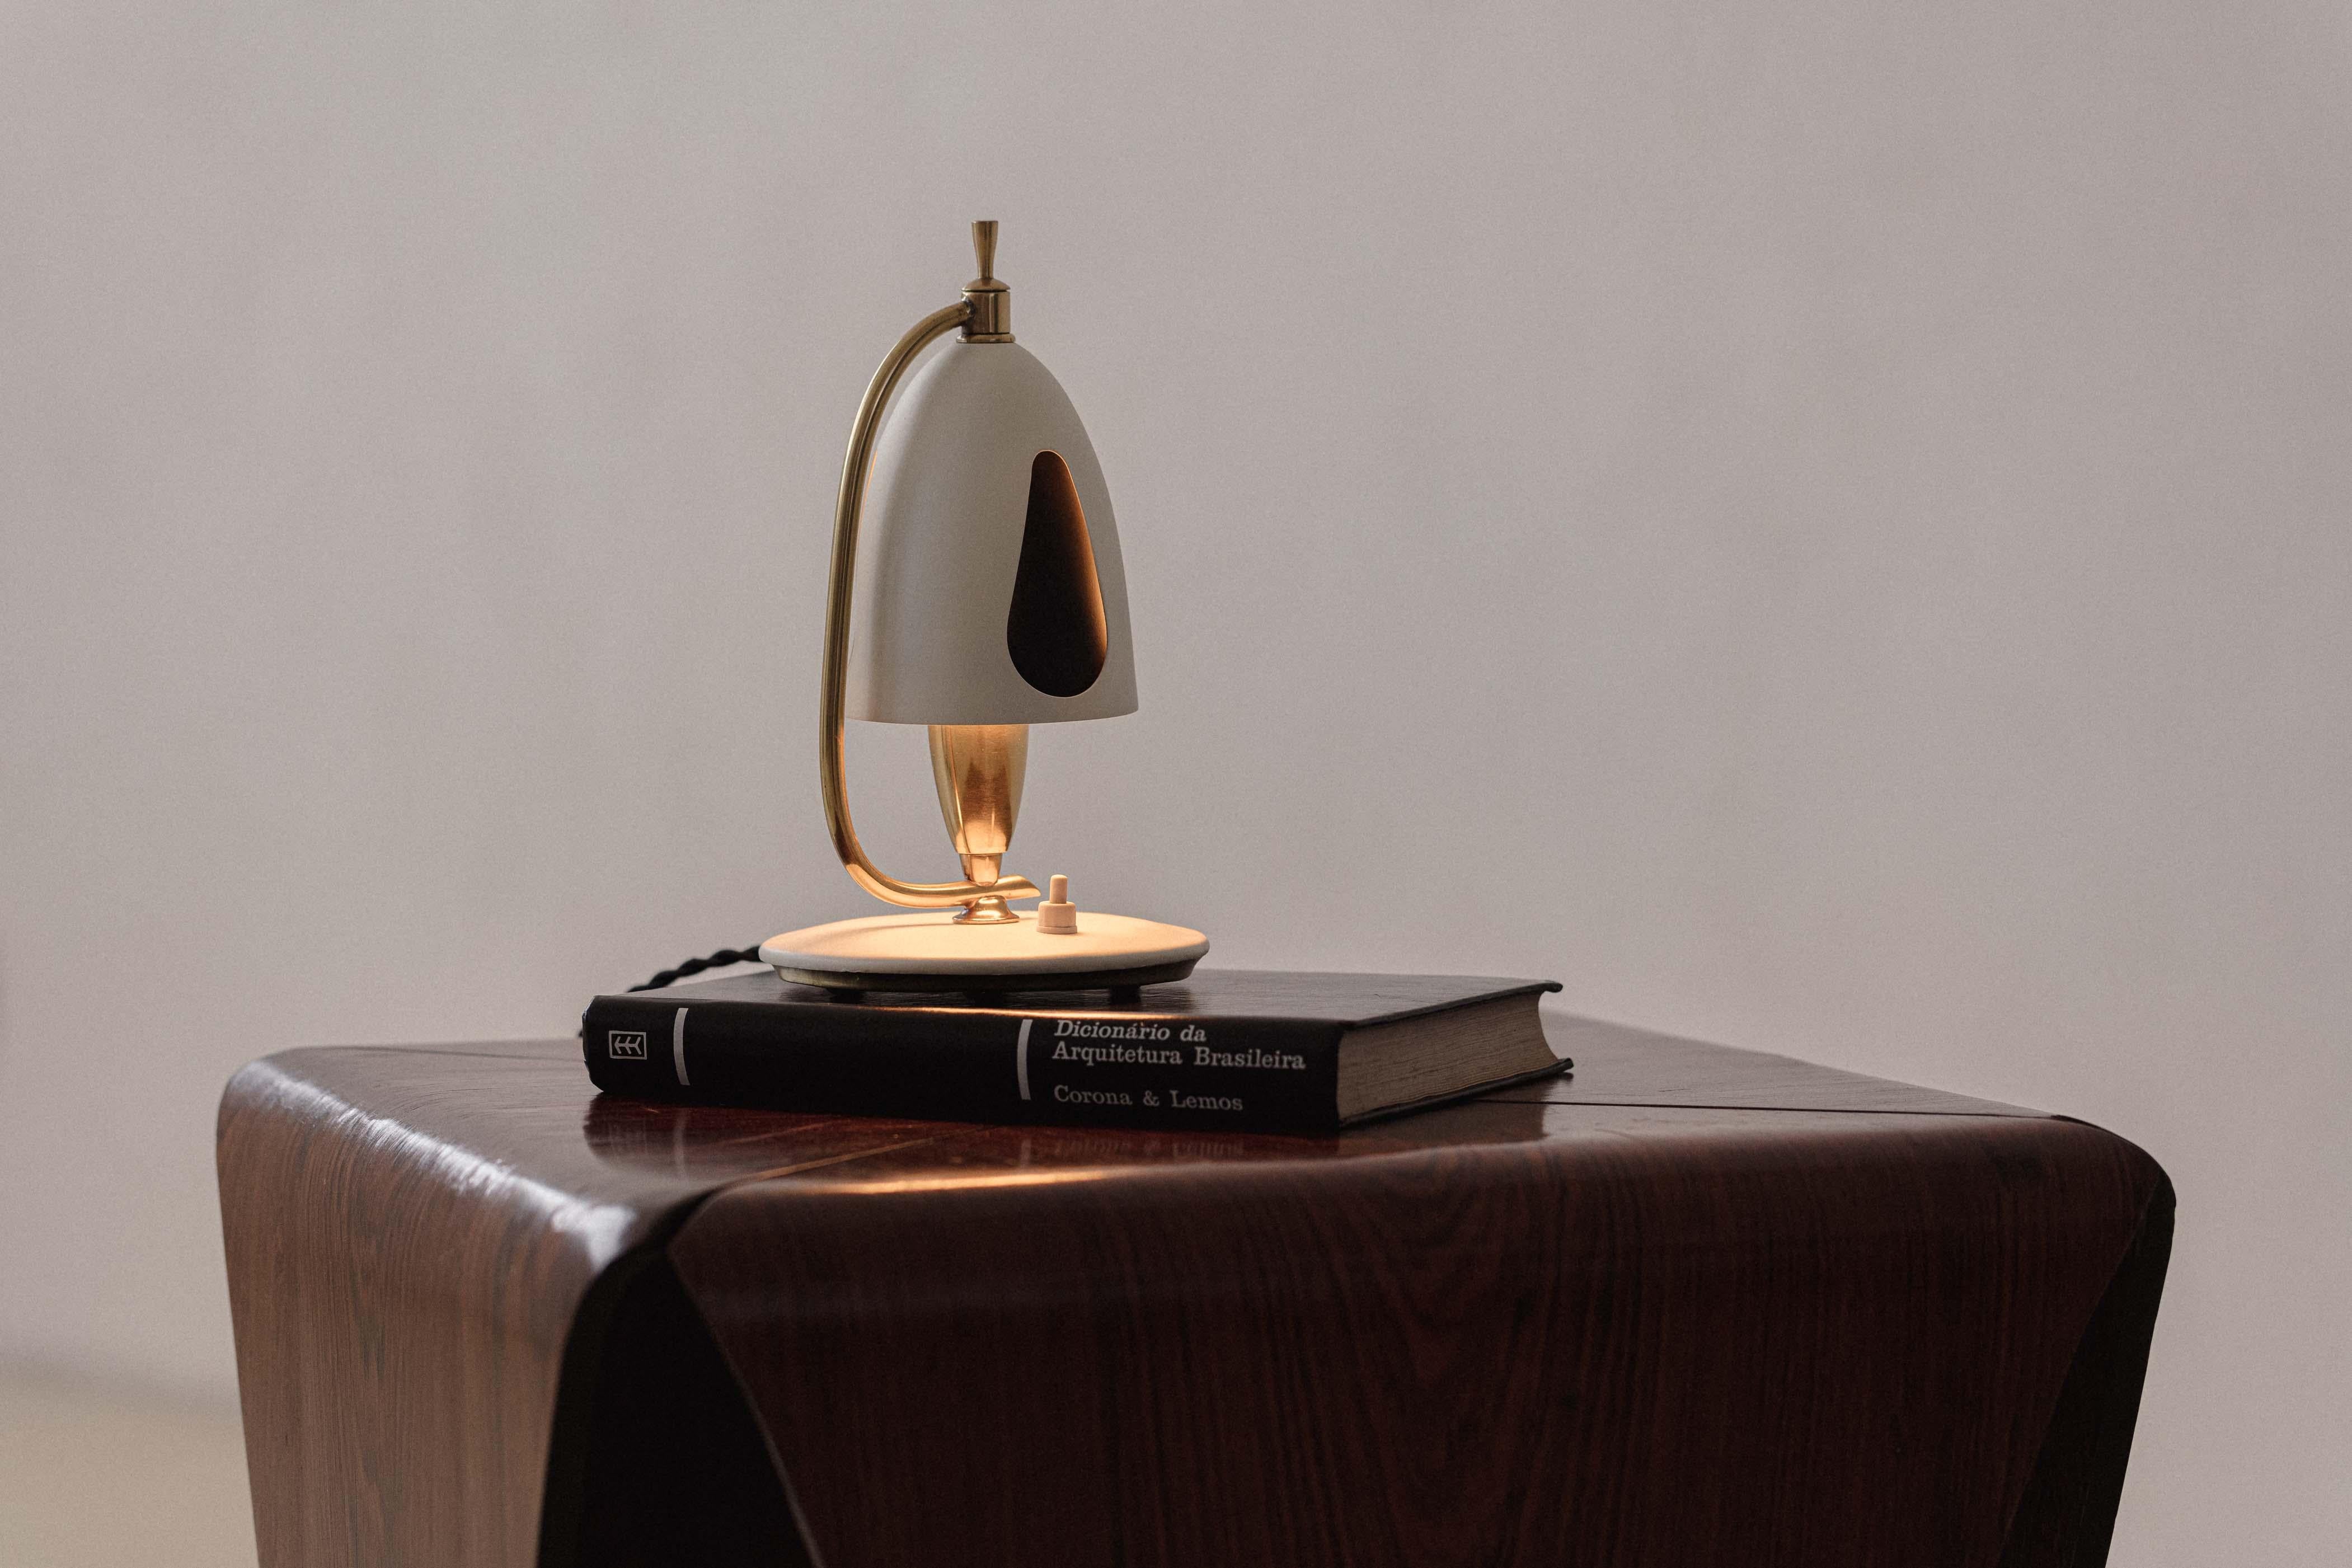 Midcentury Bedside Table Lamp, Brazilian Company Carlo Montalto & Filhos, 1950s In Good Condition For Sale In New York, NY